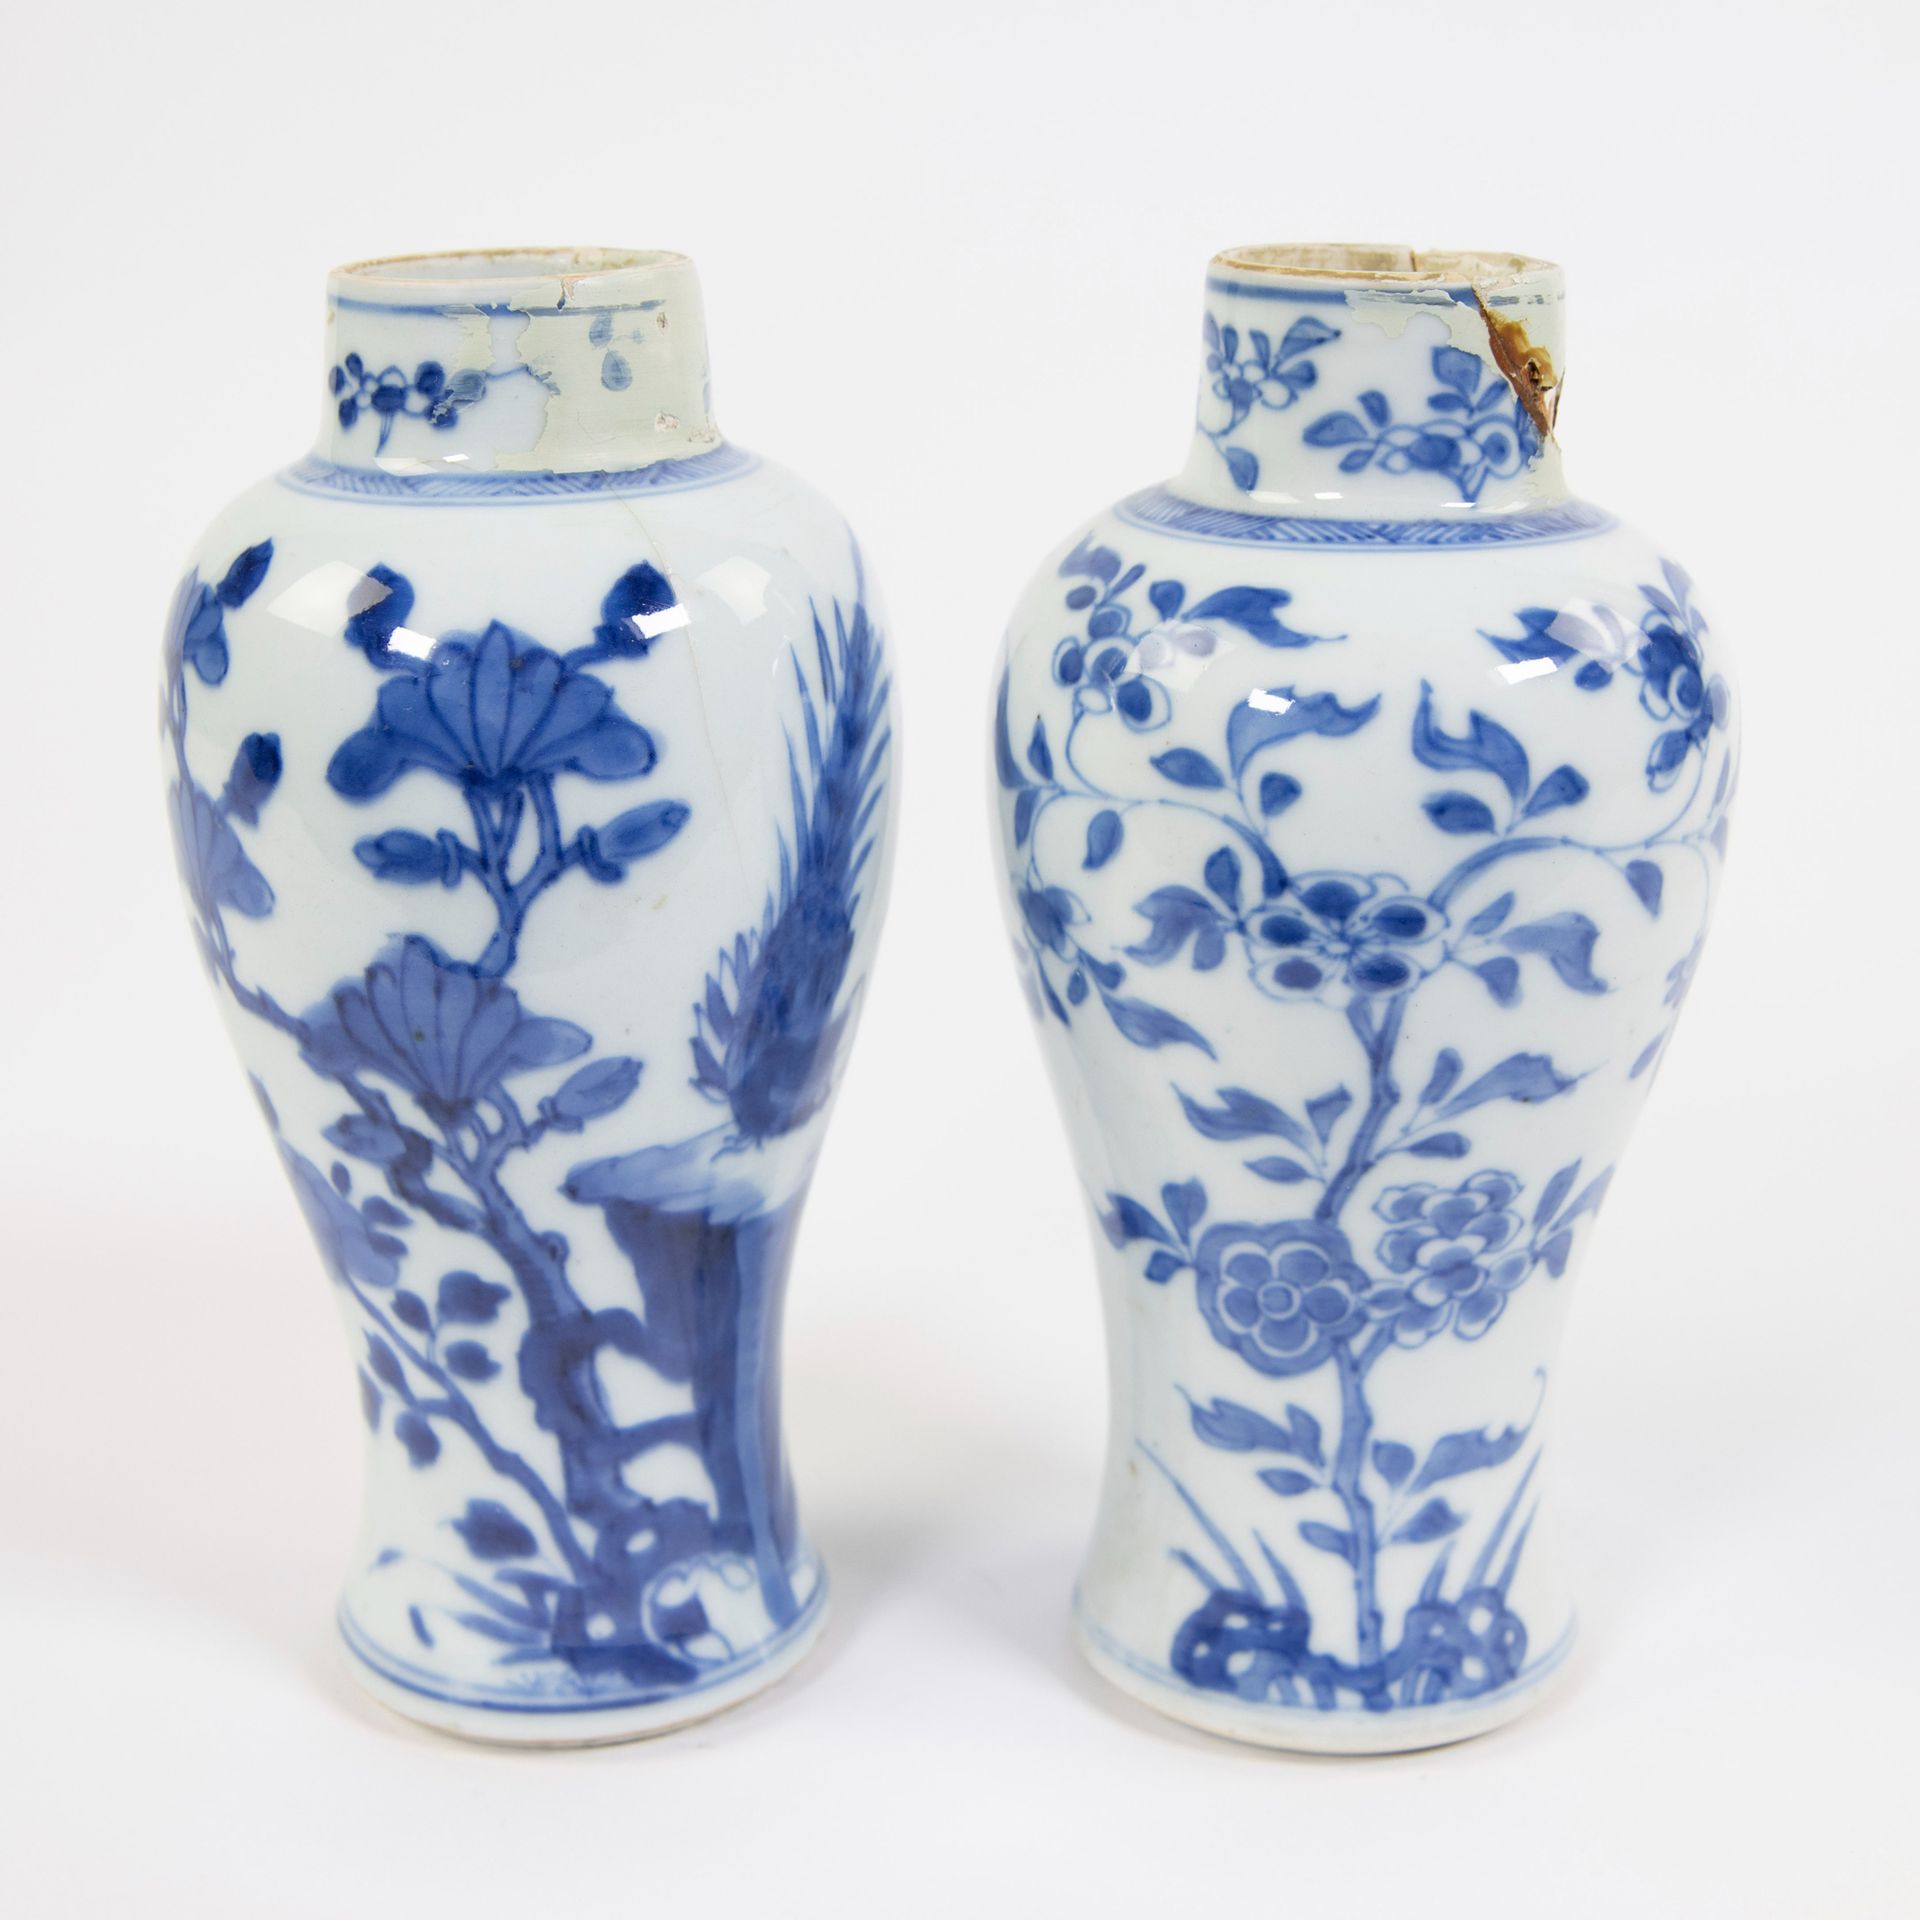 Null Two Kangxi porcelain vases, China, early 18th century
Both with resorations&hellip;